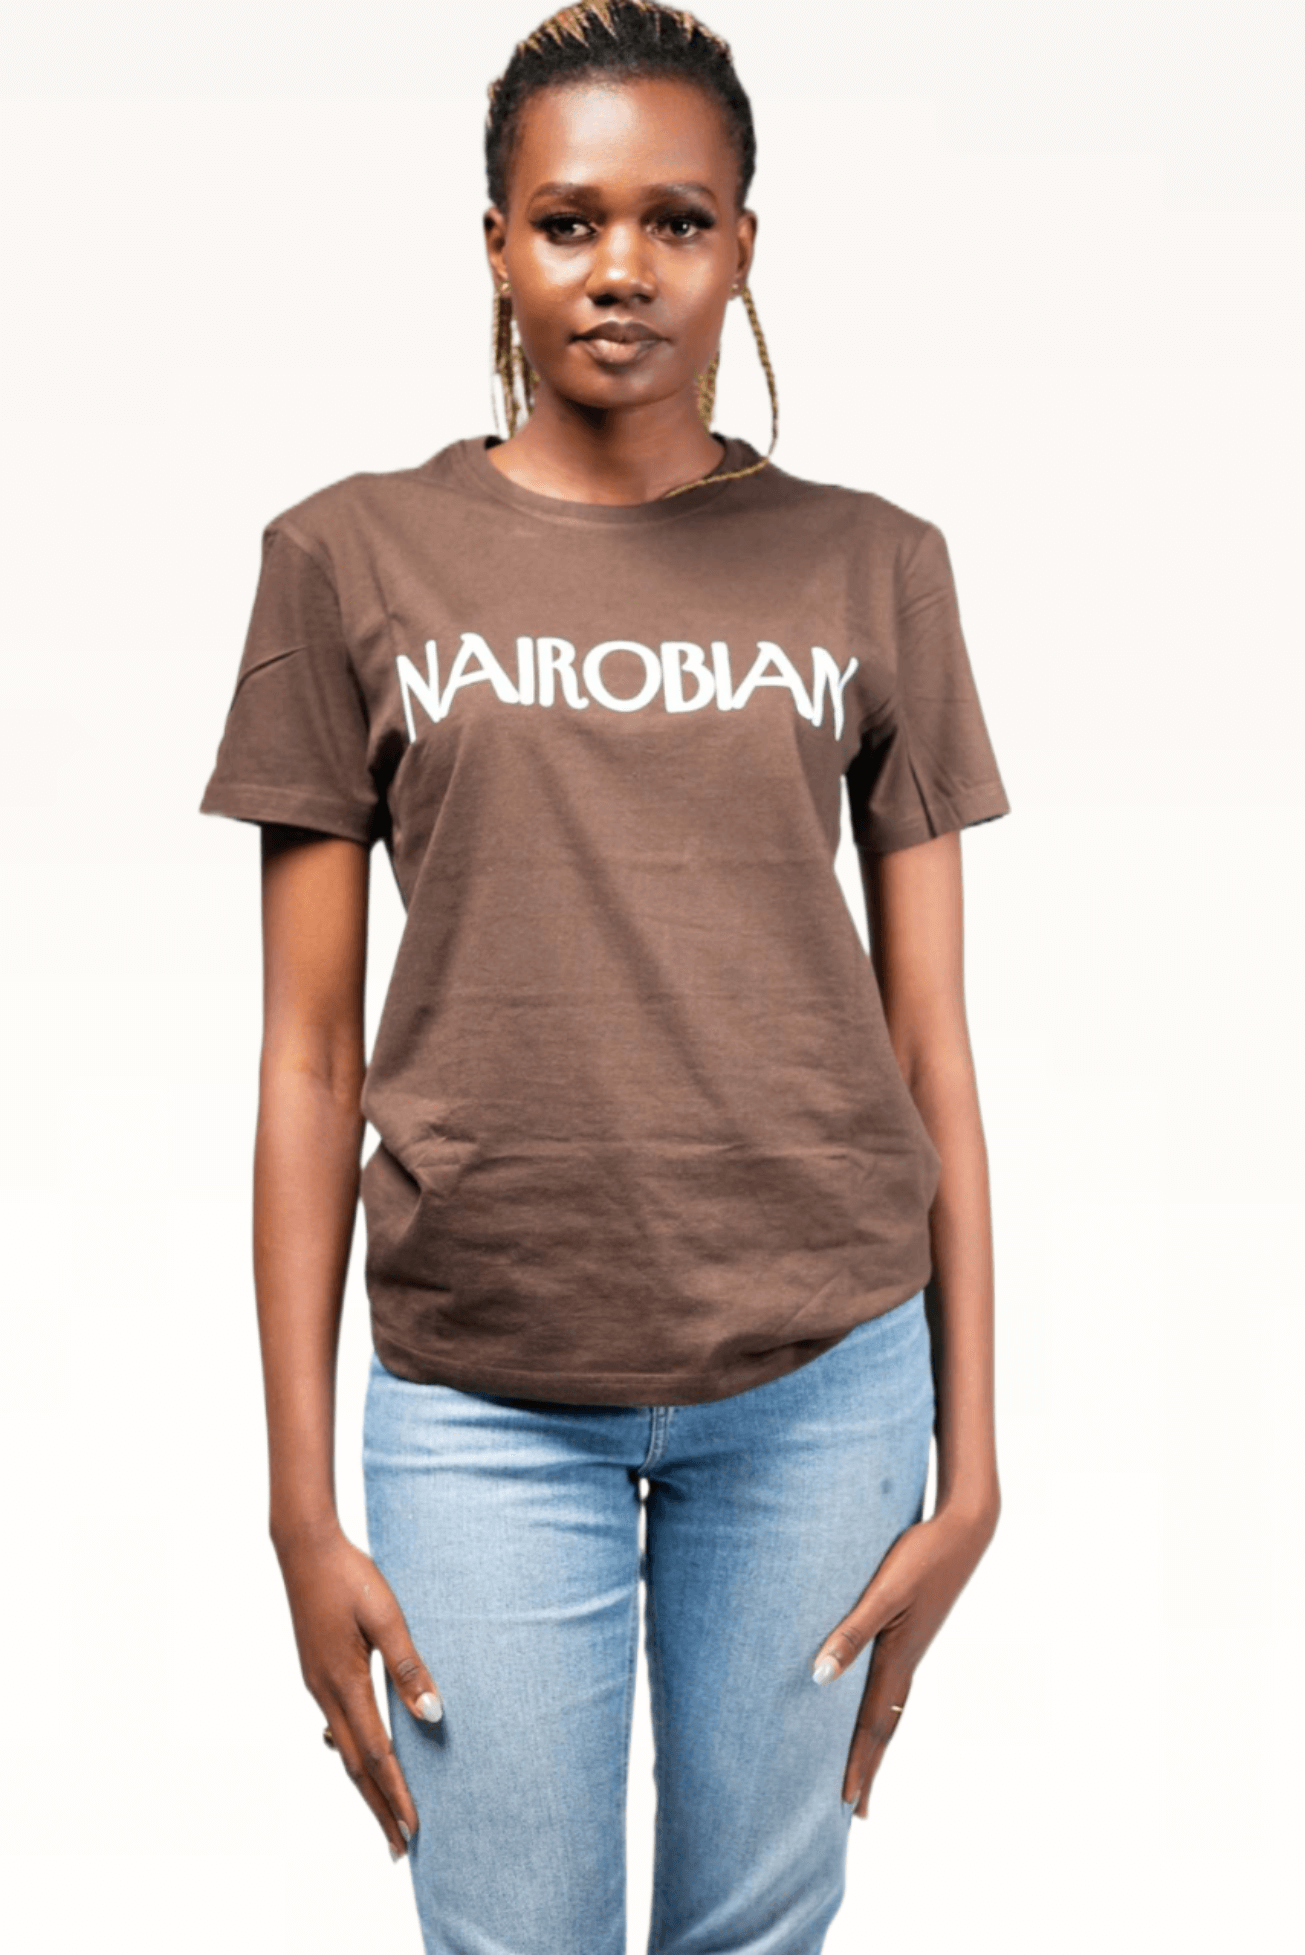 Shop Nairobian Plain T-Shirt (White Text Print) by Kali Works on Arrai. Discover stylish, affordable clothing, jewelry, handbags and unique handmade pieces from top Kenyan & African fashion brands prioritising sustainability and quality craftsmanship.